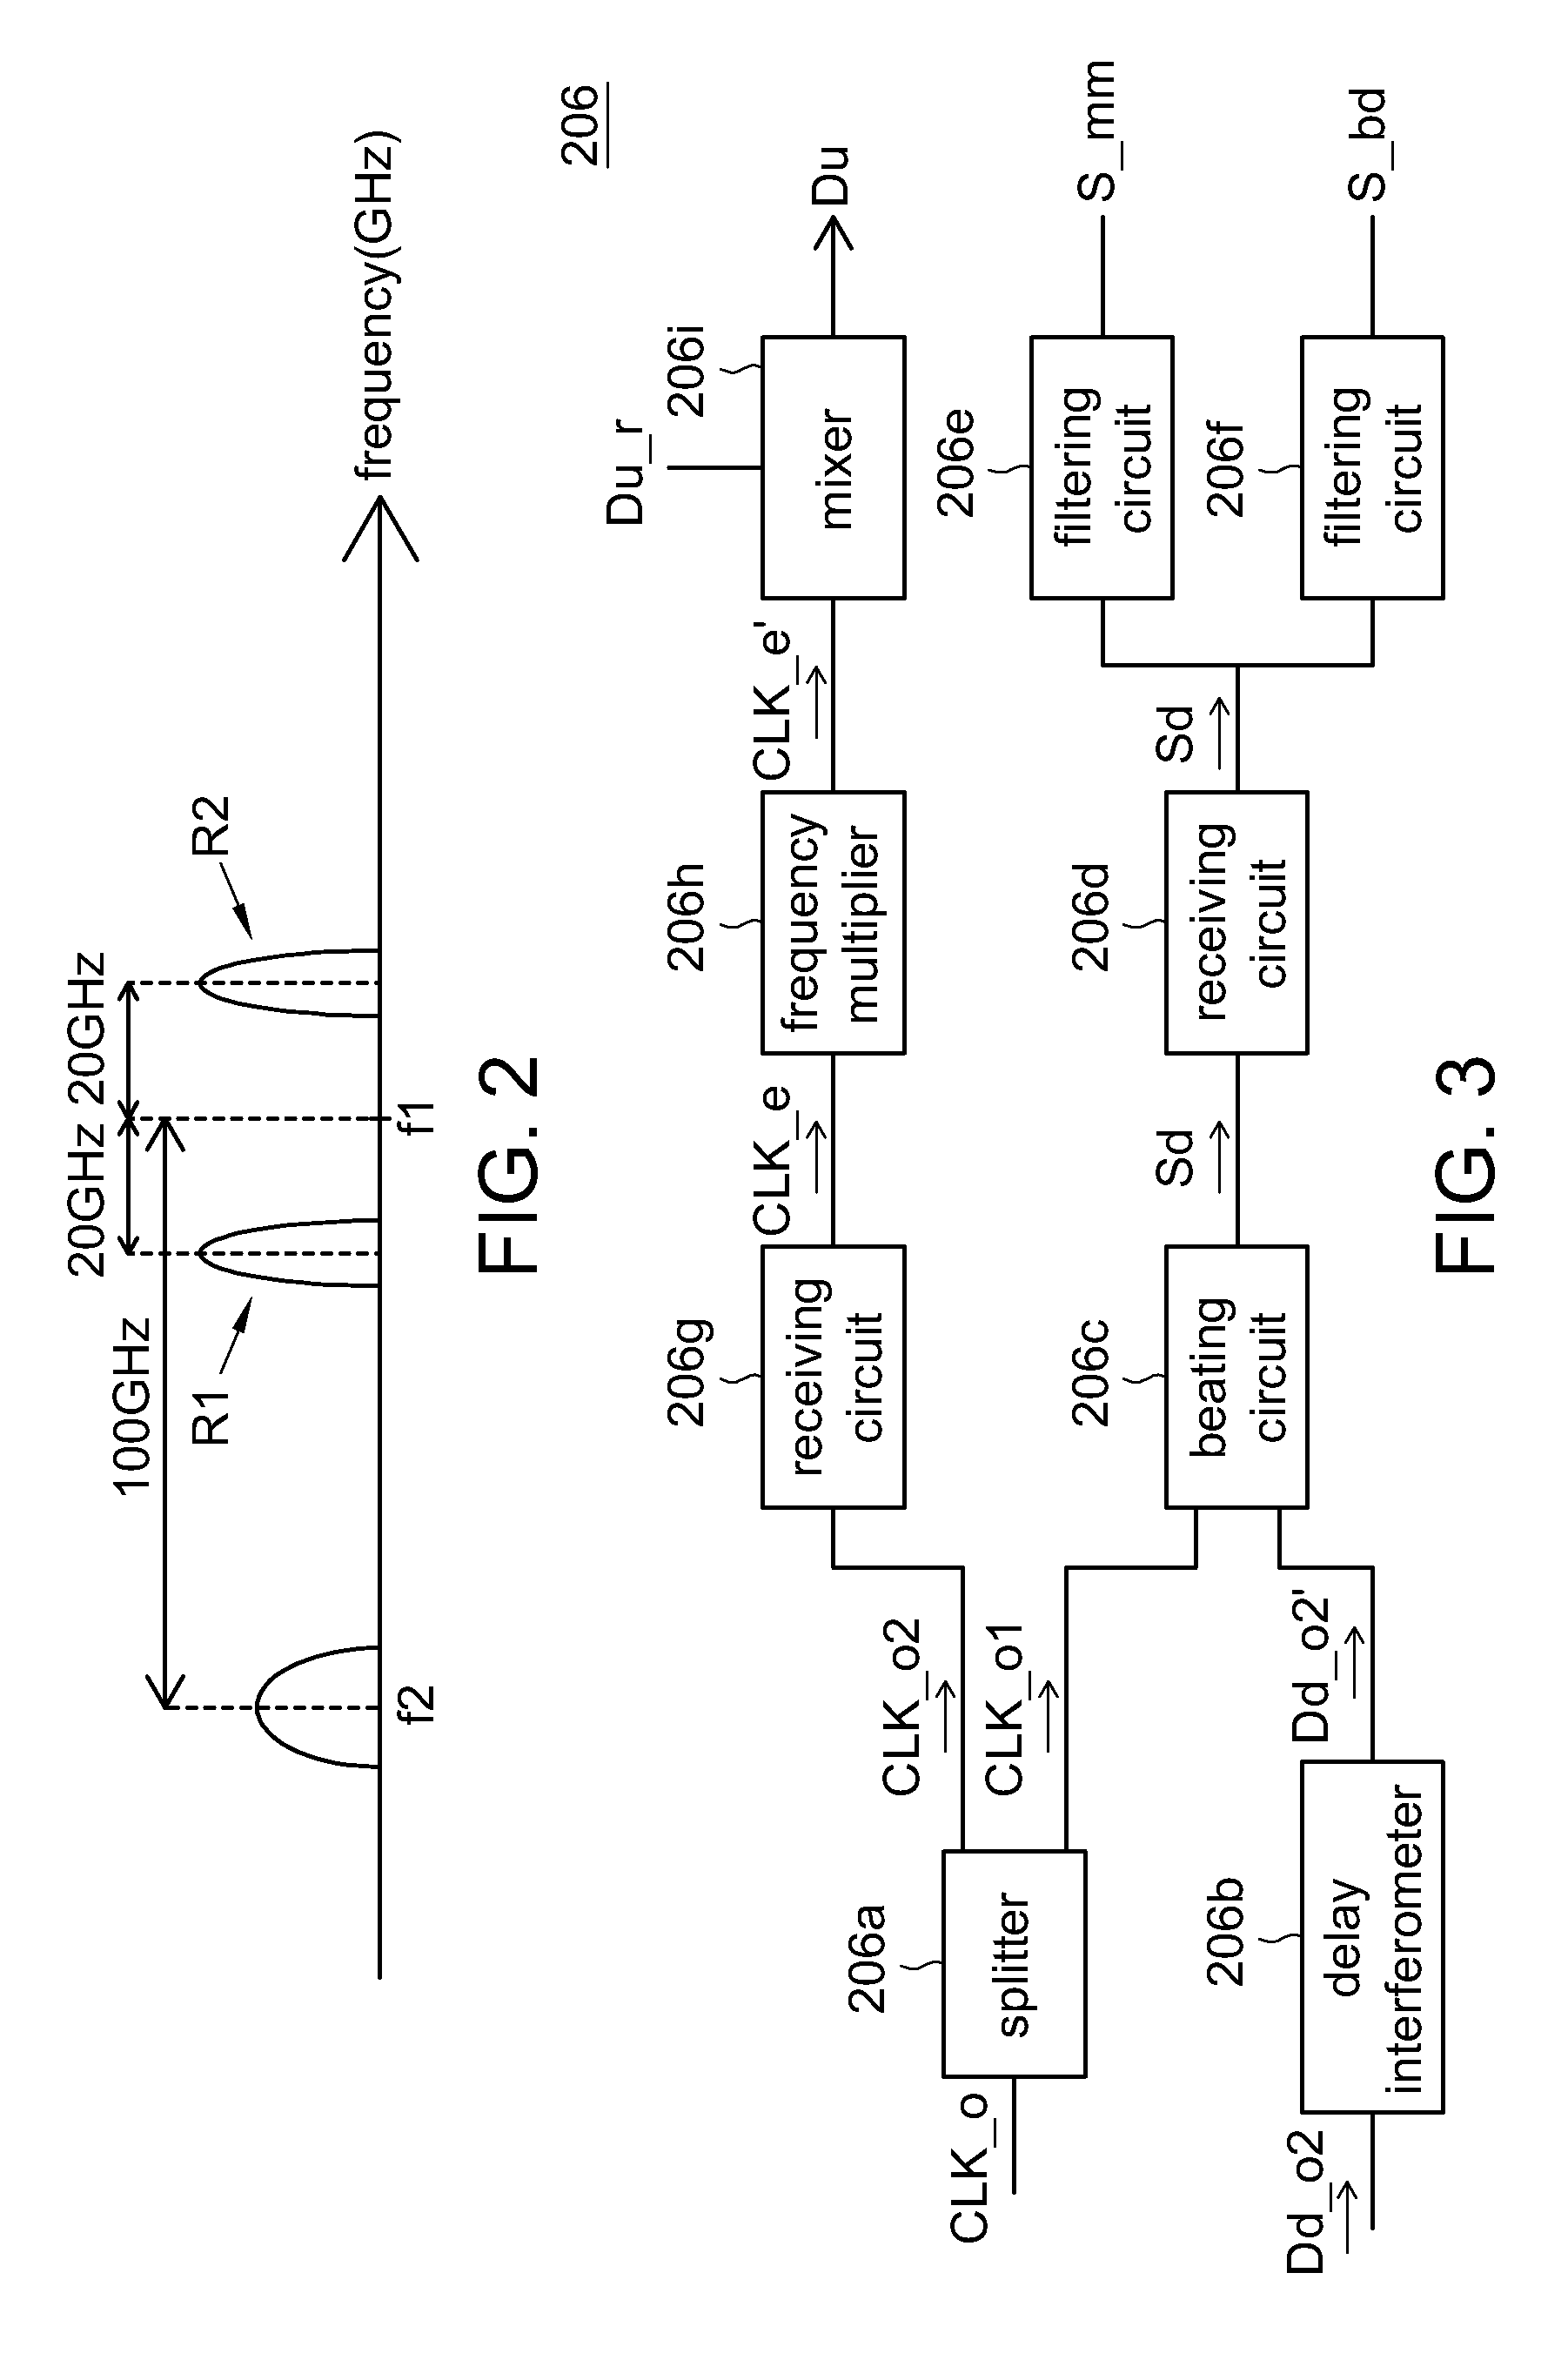 Head-End Circuit and Remote Antenna Unit and Hybrid Wired/Wireless Network System and Transceiving Method Using Thereof